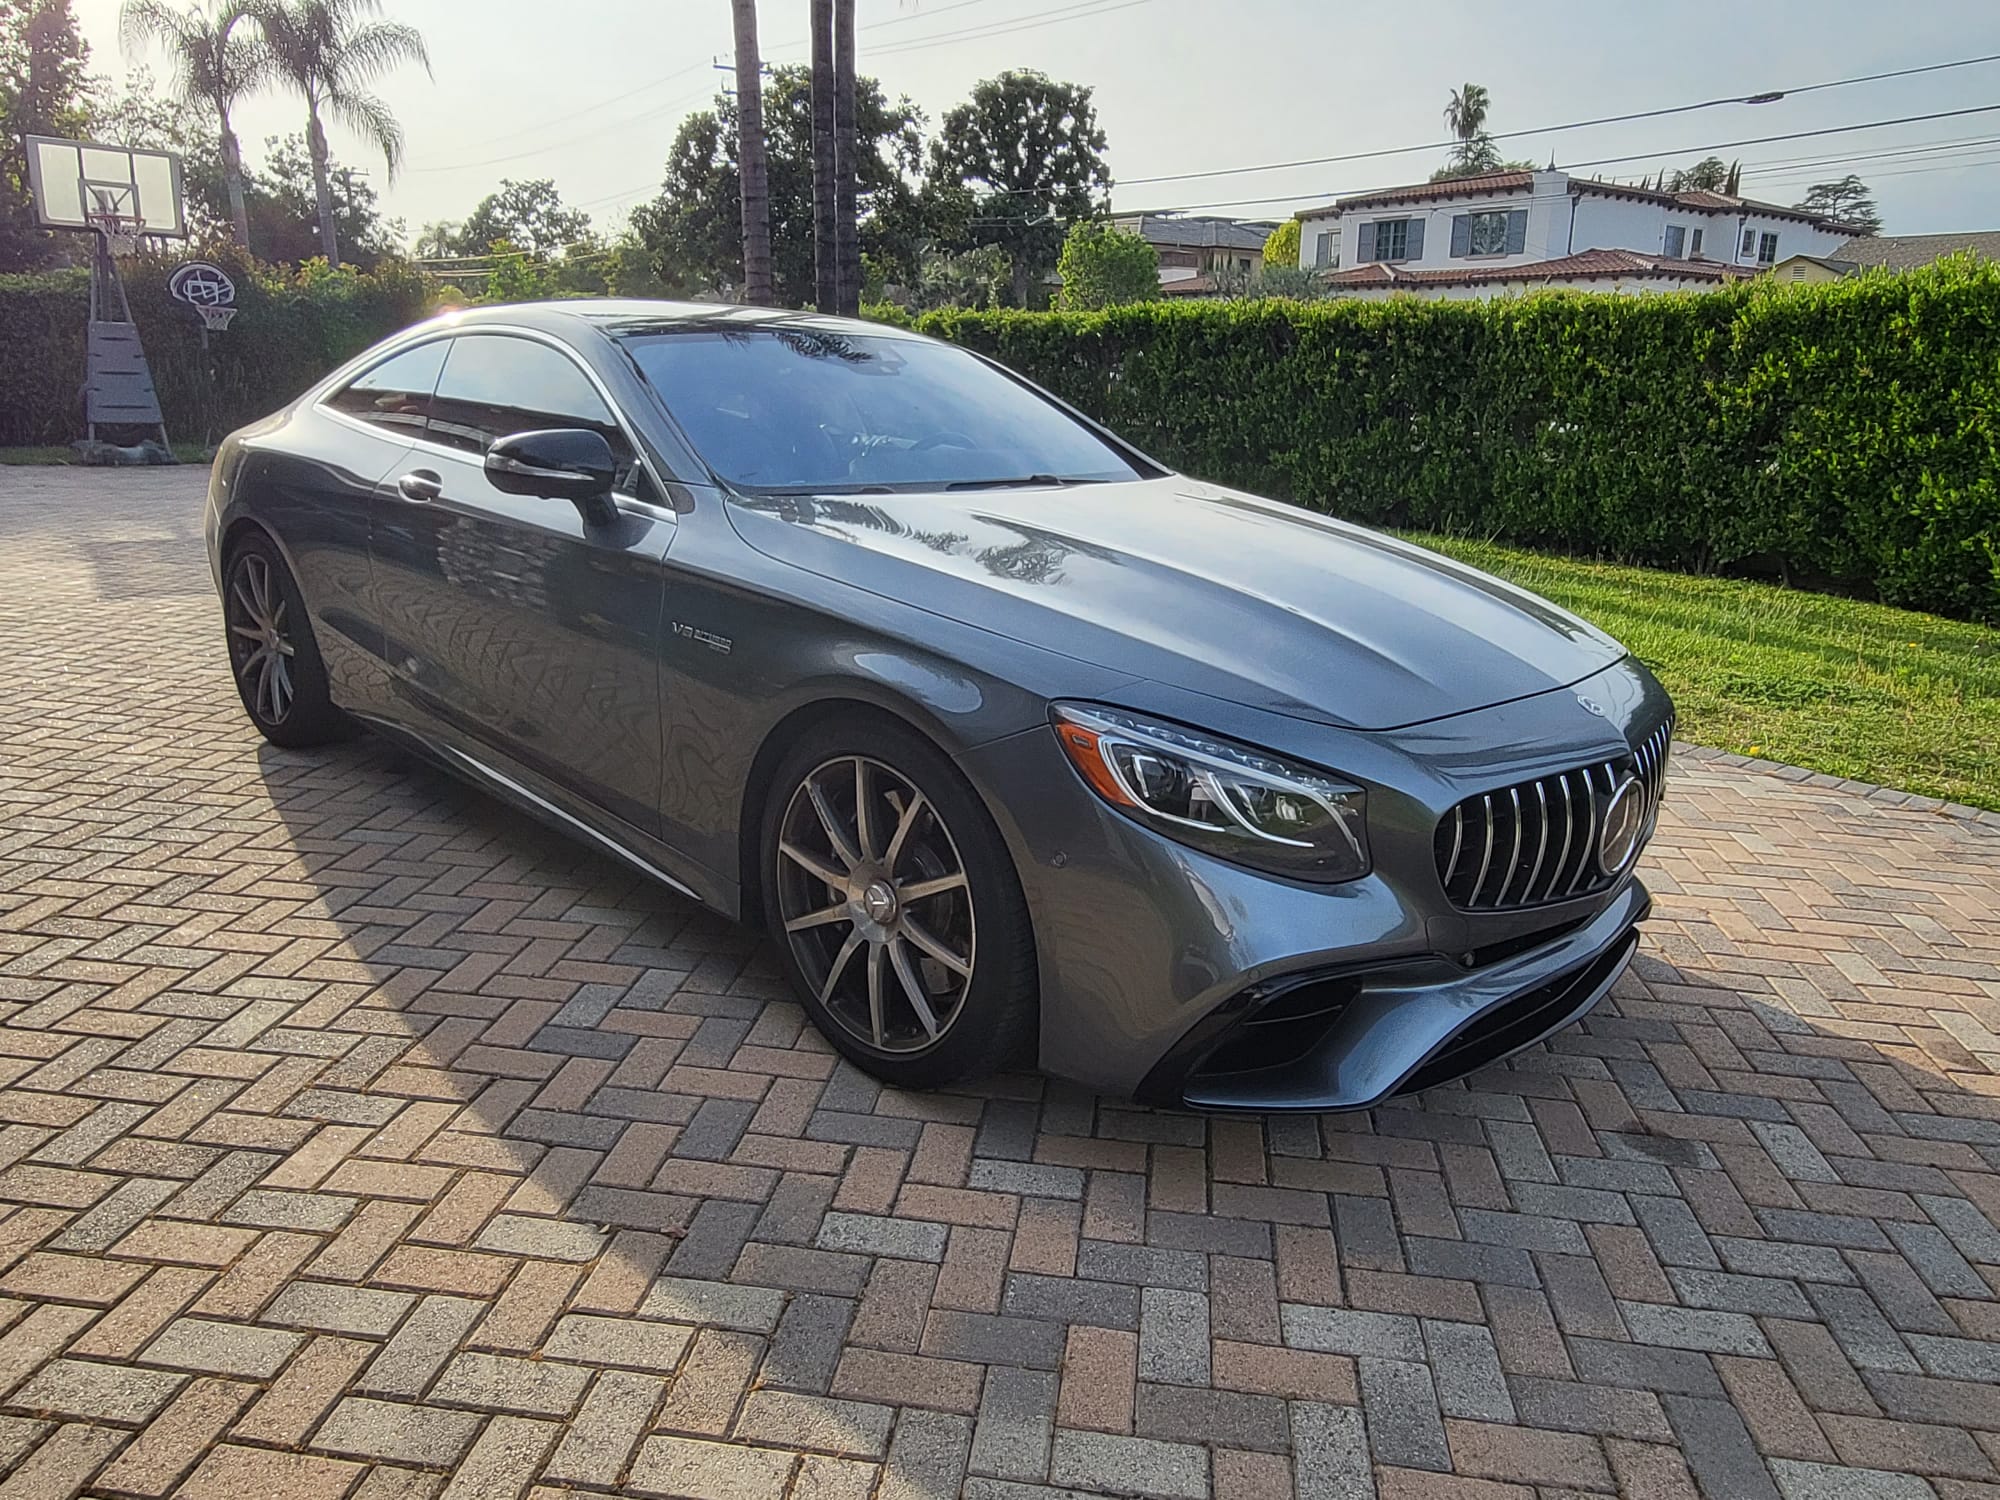 Used Mercedes-benz AMG S 63 for Sale in Glendale, CA